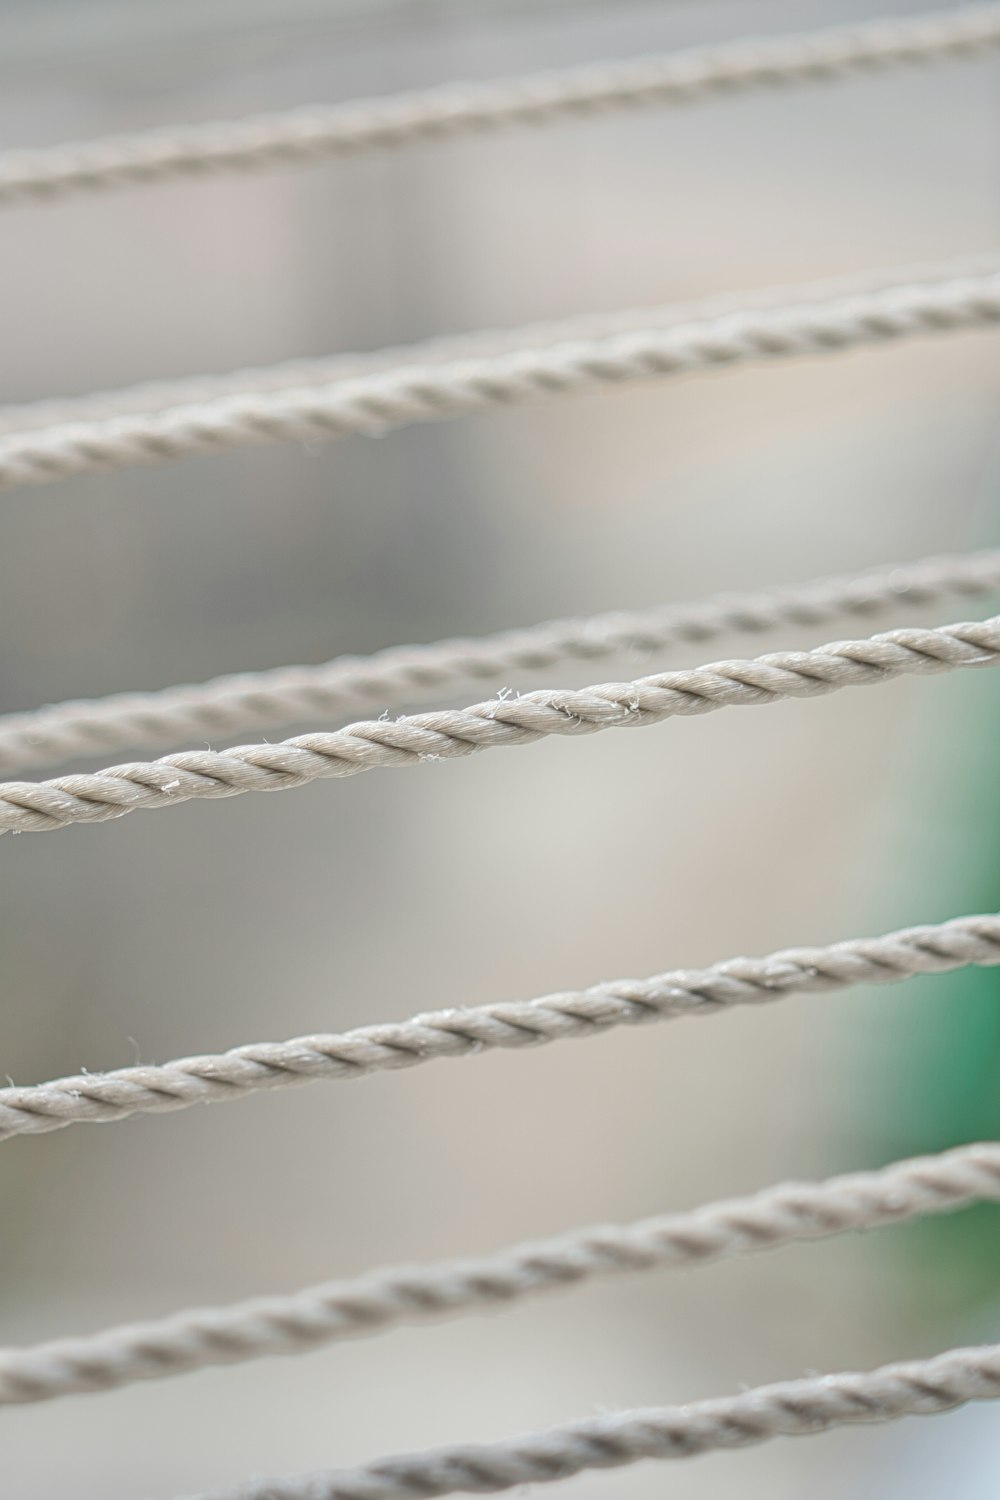 white and green rope in close up photography